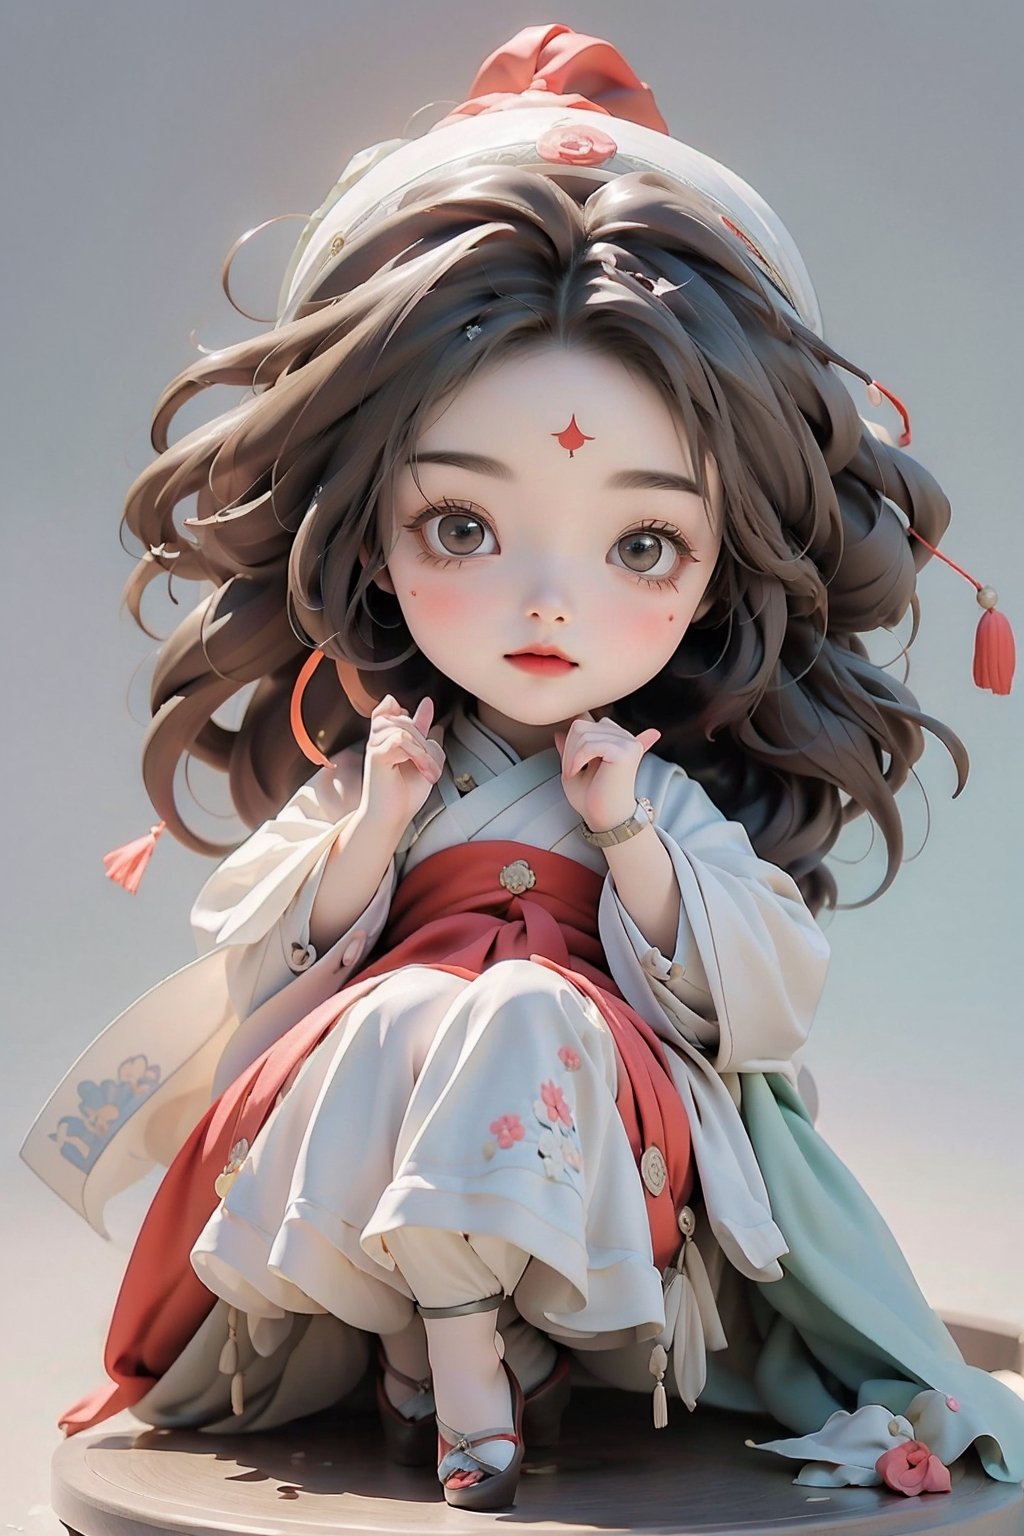 (Masterpiece, ((Chibi)), Best Quality: 1.4), (Detailed Eyes Delicate Pupils Multiple Eyes), (Ambiguous, Desire: 1.2), (Poetry, Comfort: 1.3),, 1 Girl, (Full Body Photo), (Opening: 1.2), the national costume of the Miao people in China, decorated with silver, exquisite embroidery and lace, whimsically blending elements of Victorian style,
Designed to age over time, the garment consists of a red robe-like garment called an "attush," made from intricately woven fabric decorated with intricate geometric patterns. She also wore a 'kaparamip' headband with decorative embroidery. The clothes are mainly brown, red, green and other earth tones, with the cute and dark charm of Gothic Lolita and Link Girl.